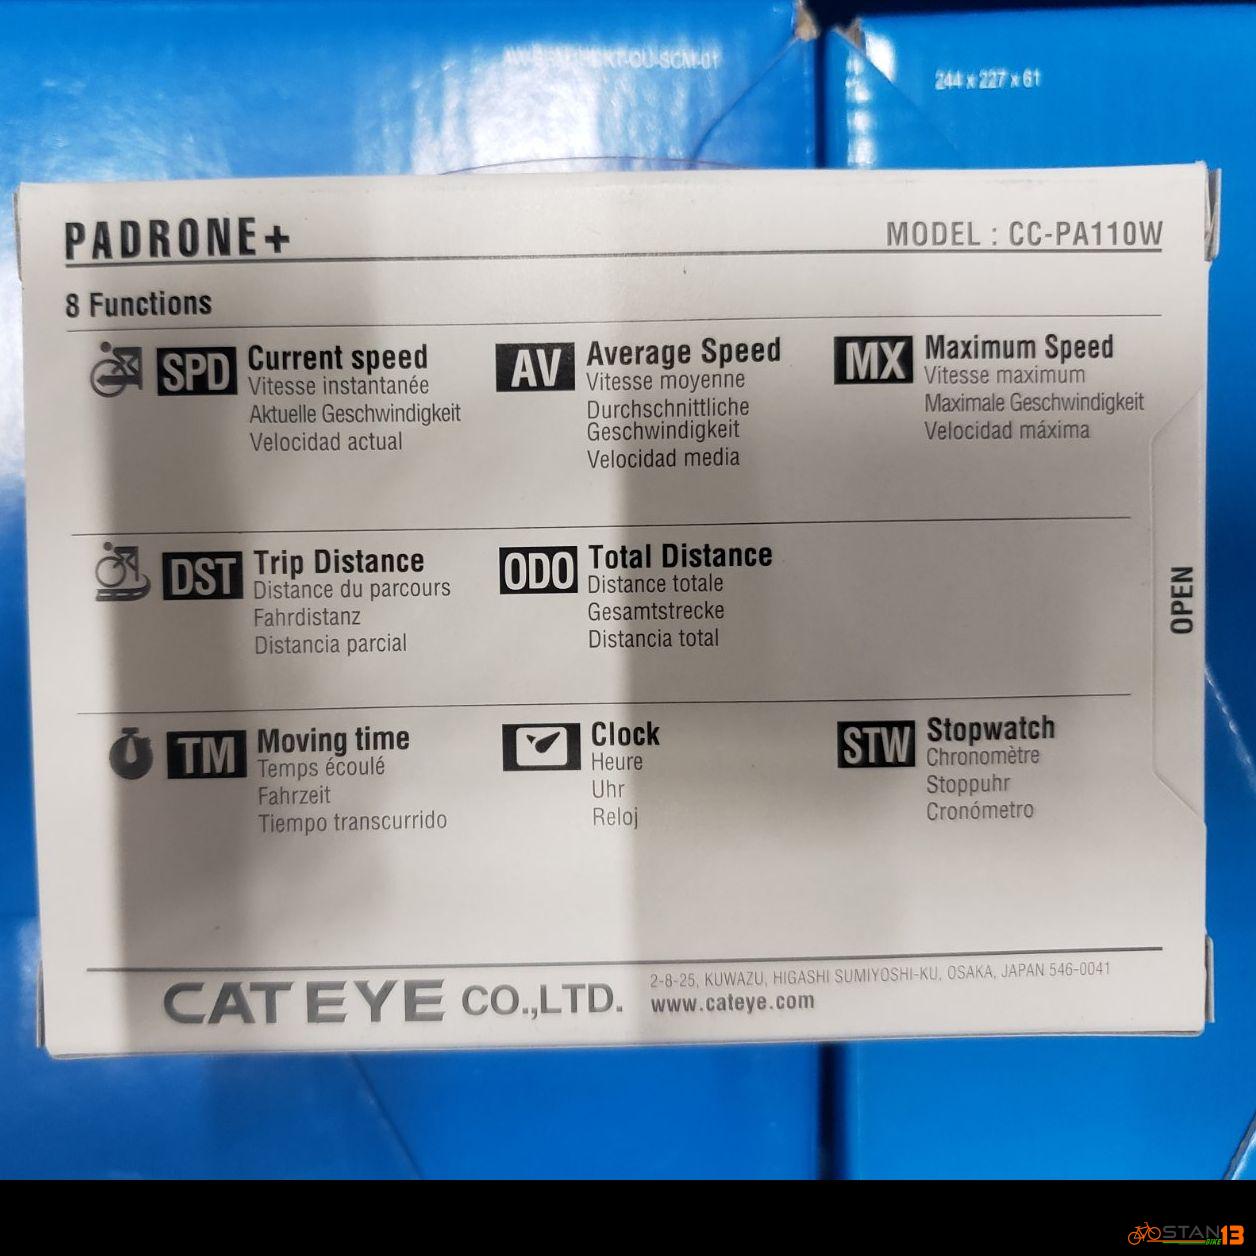 CATEYE PADRONE PLUS with BACK LIGHT Speedometer